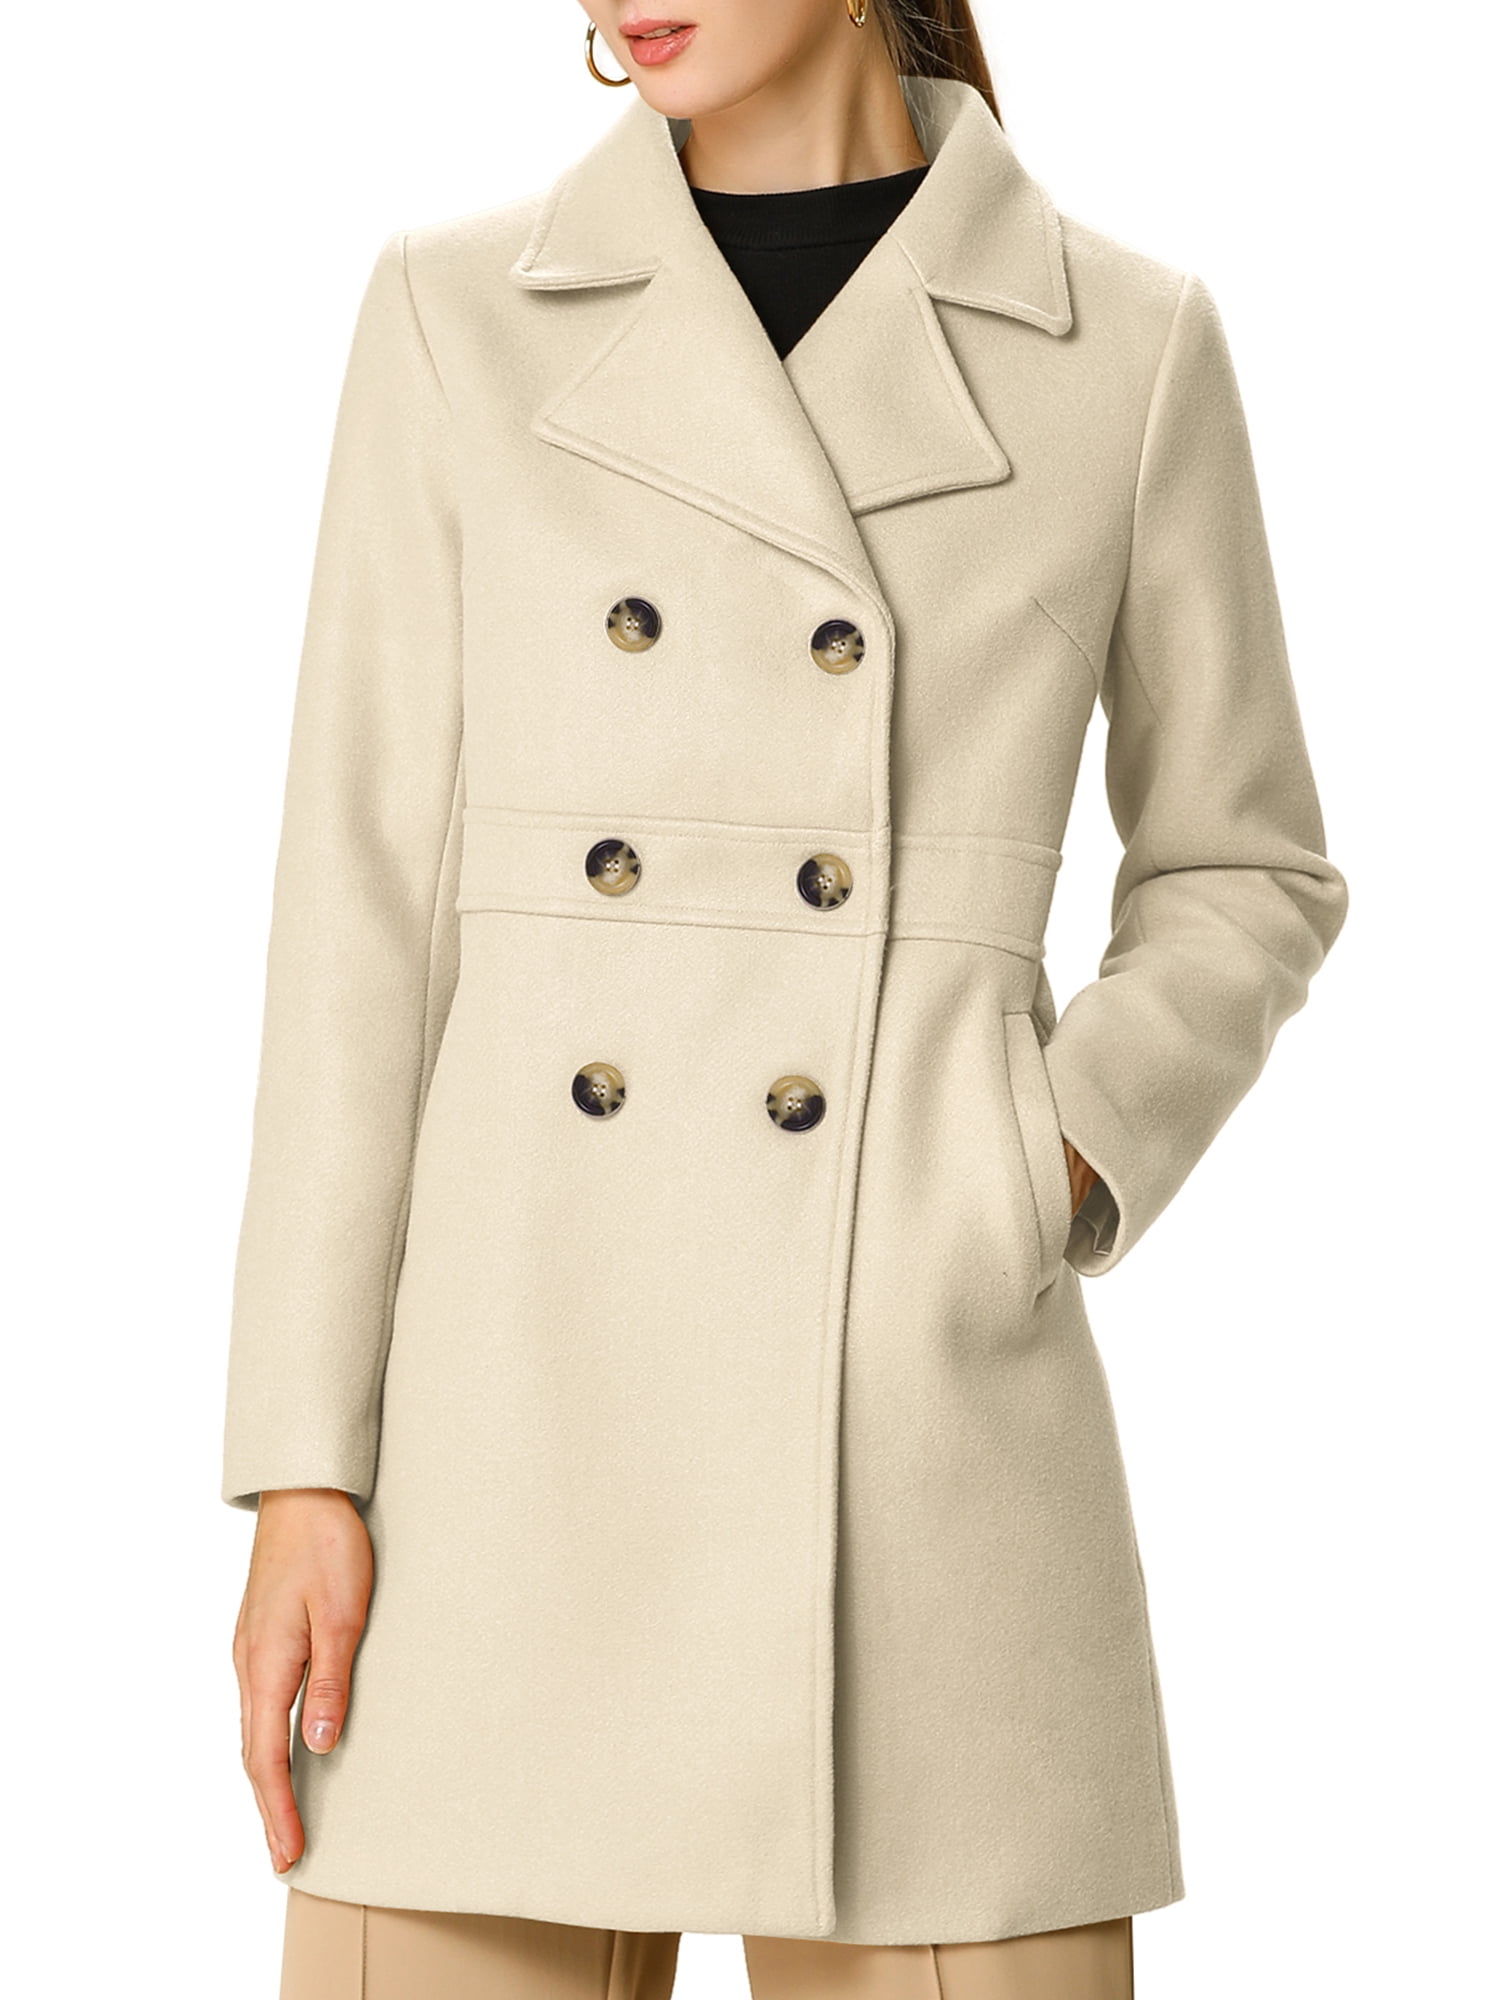 Allegra K - Allegra K Women's Notched Lapel Double Breasted Trench Coat ...